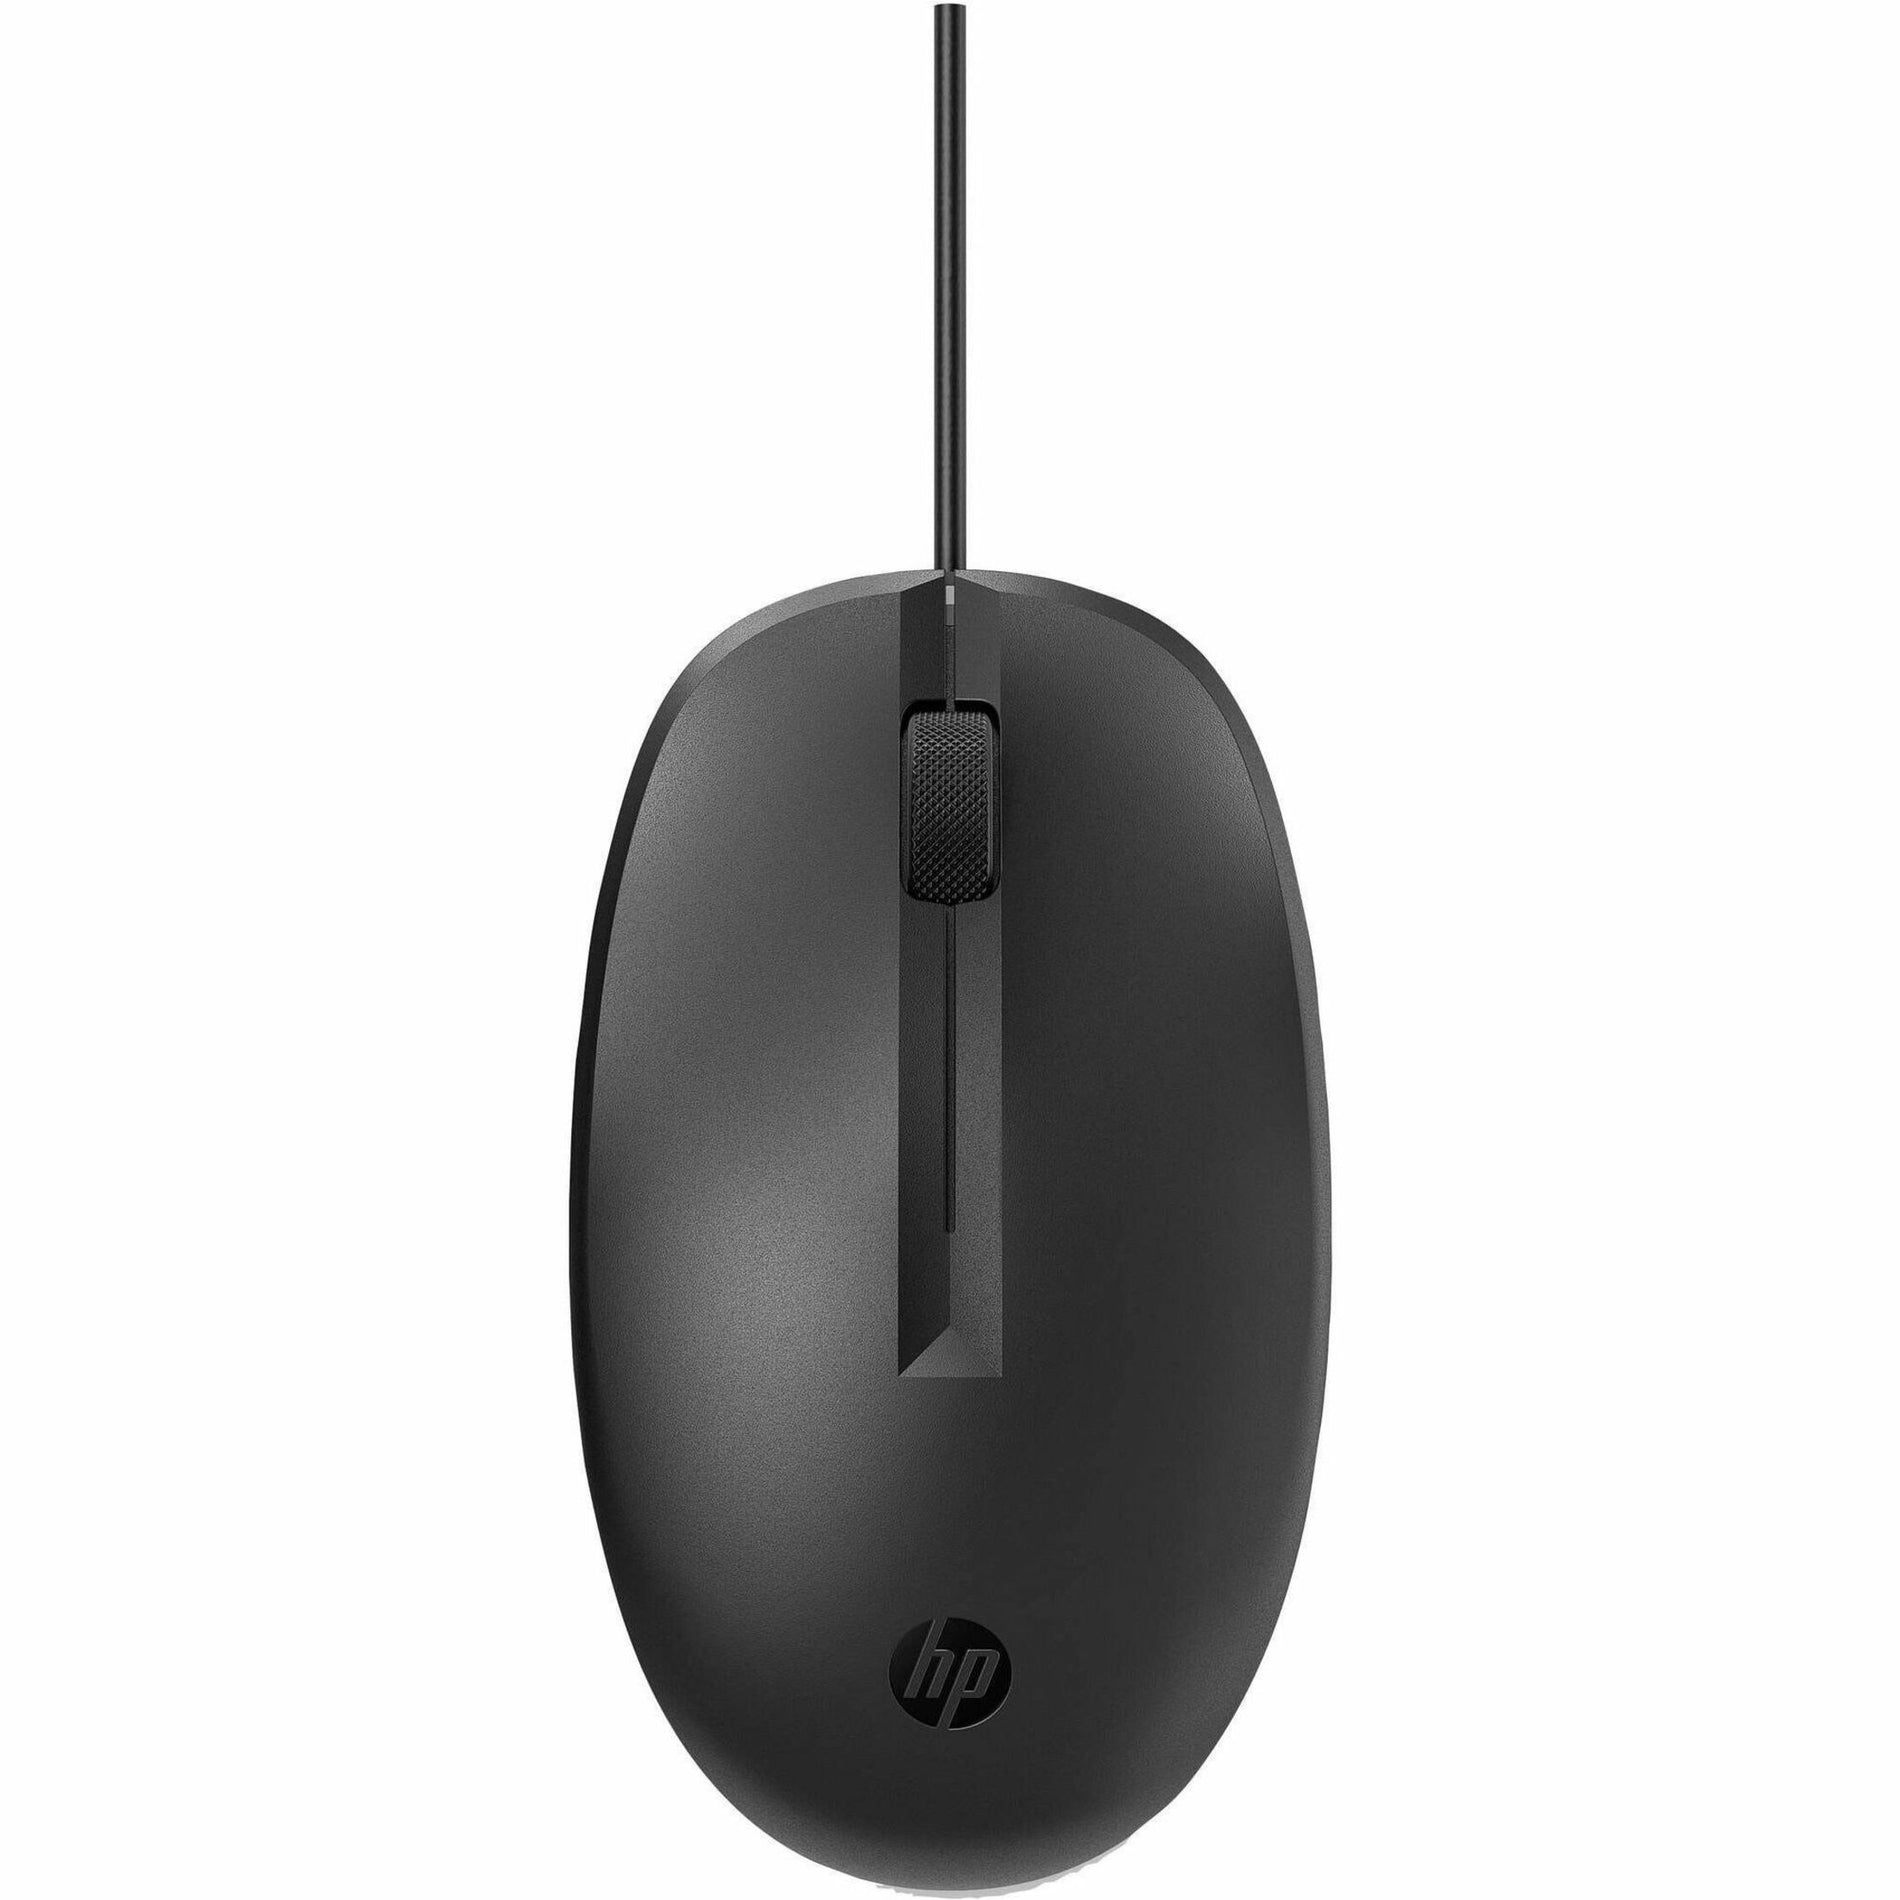 HP 265A9UT 125 Wired Mouse, USB Optical Scroll Wheel, 1200 dpi